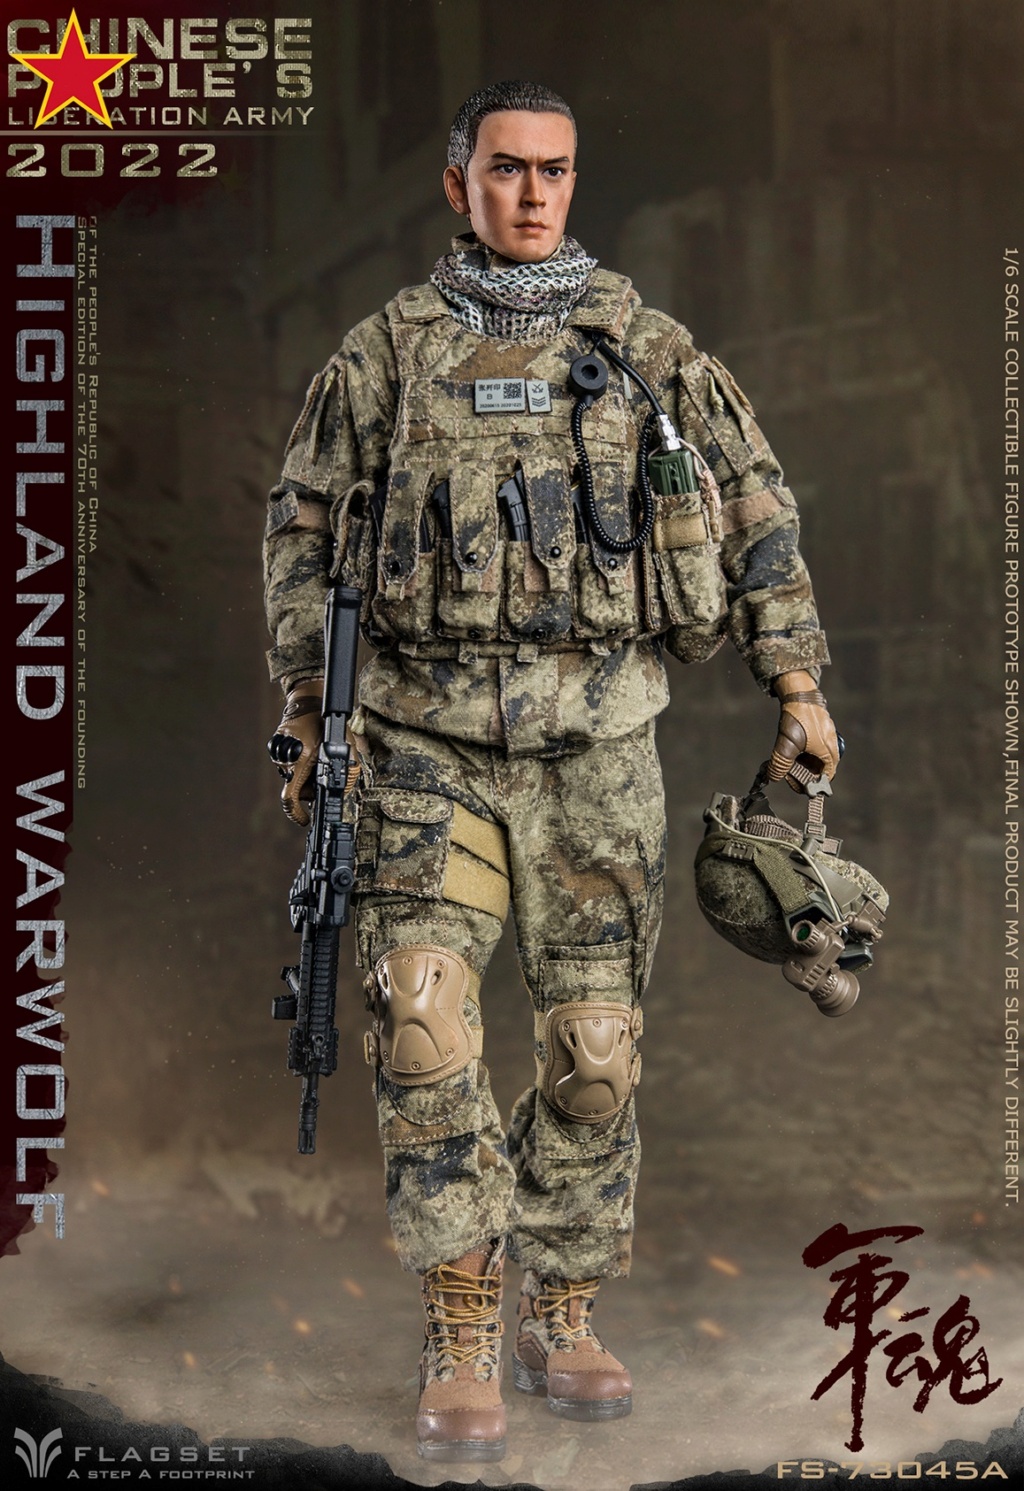 PeoplesChineseLiberationArmy - NEW PRODUCT: Flagset: 1/6 People's Chinese Liberation Army Series - Highland Warwolf /Sniper #FS-73045A/B 12545810